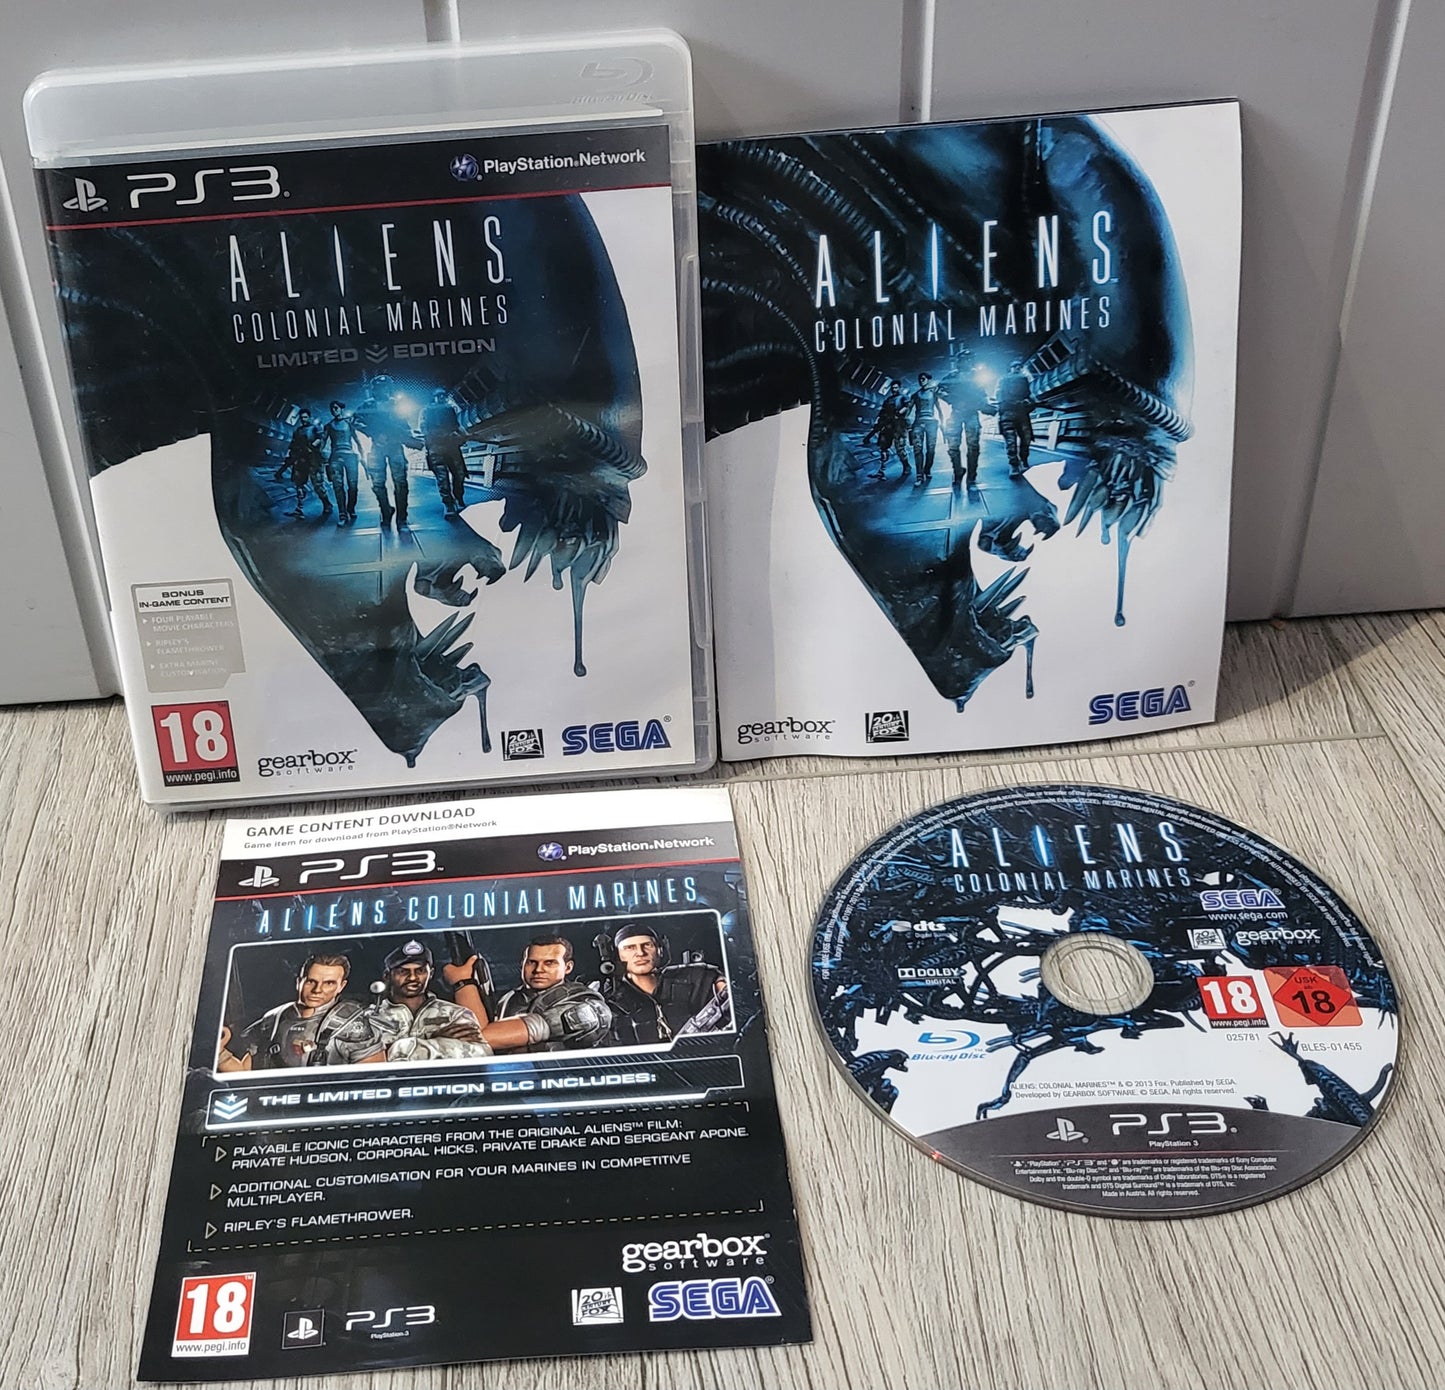 Aliens Colonial Marines Limited Edition Sony Playstation 3 (PS3) Game